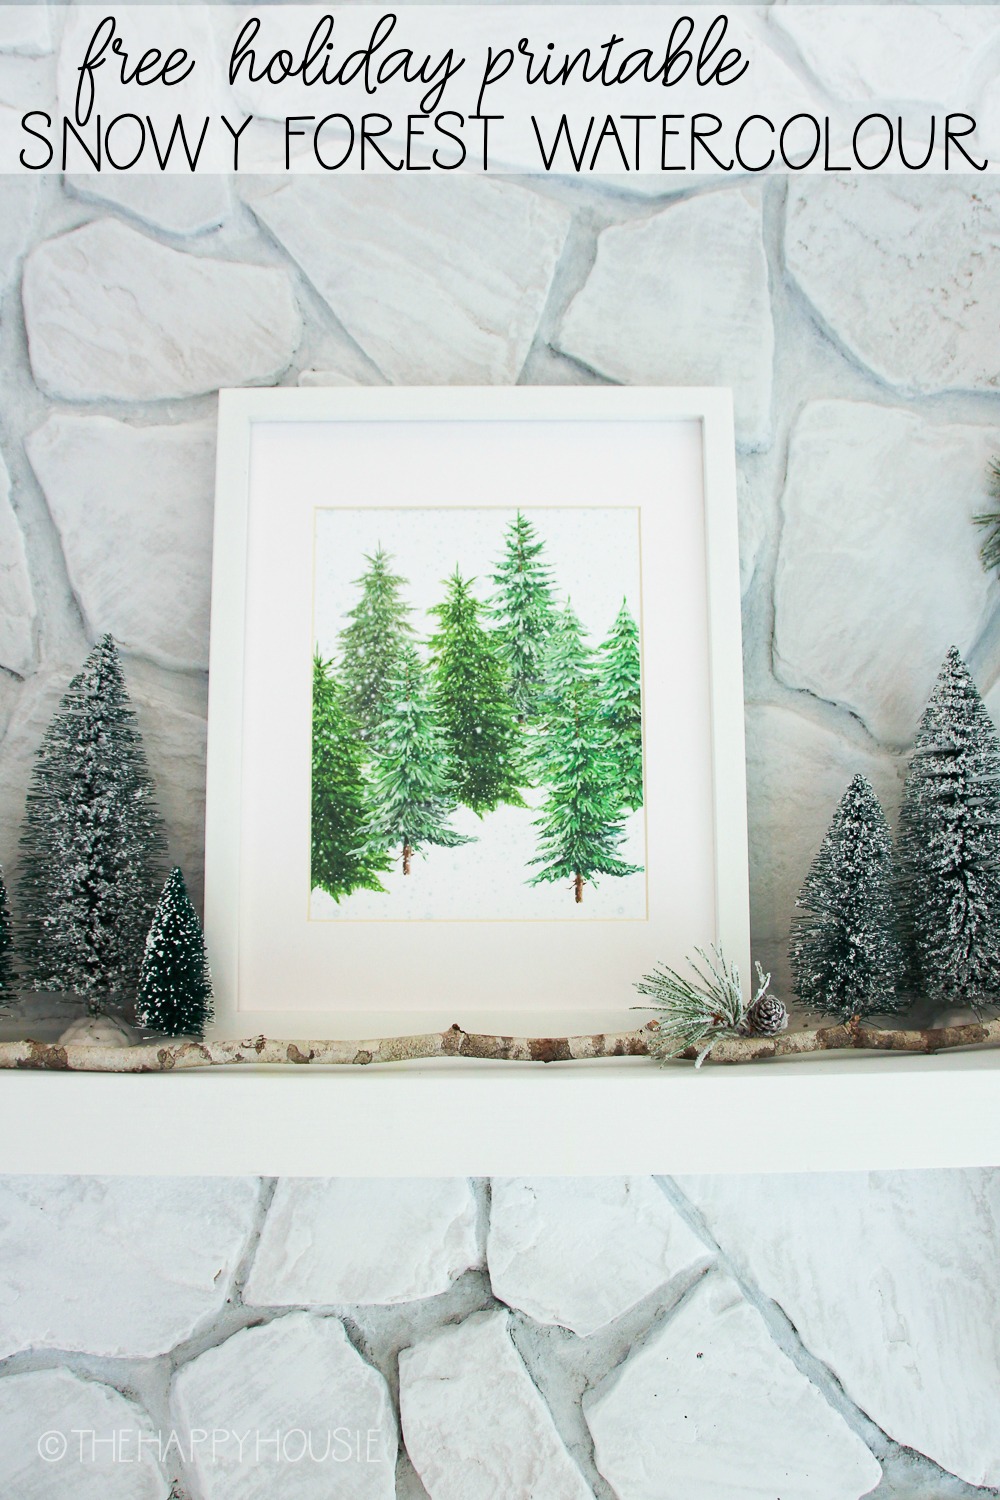 Free Holiday Printable Snowy Forest Watercolour on the mantel graphic.